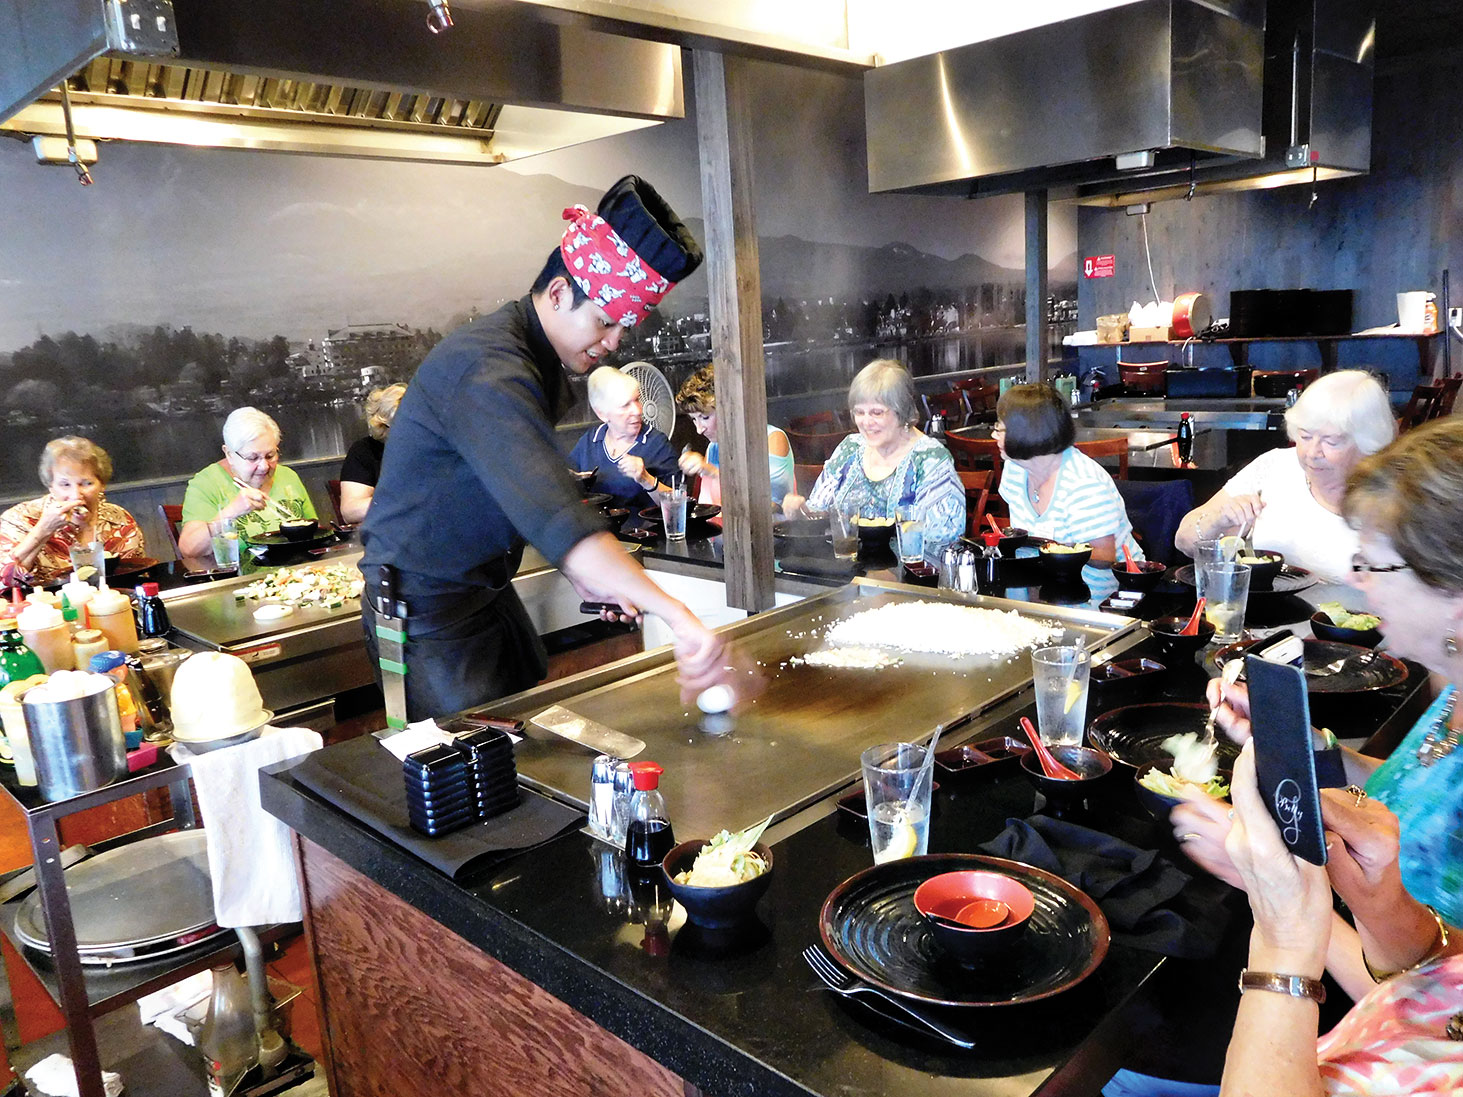 Rockin’ Red Ranchers are entertained by the Hibachi chef with his amazing skills.